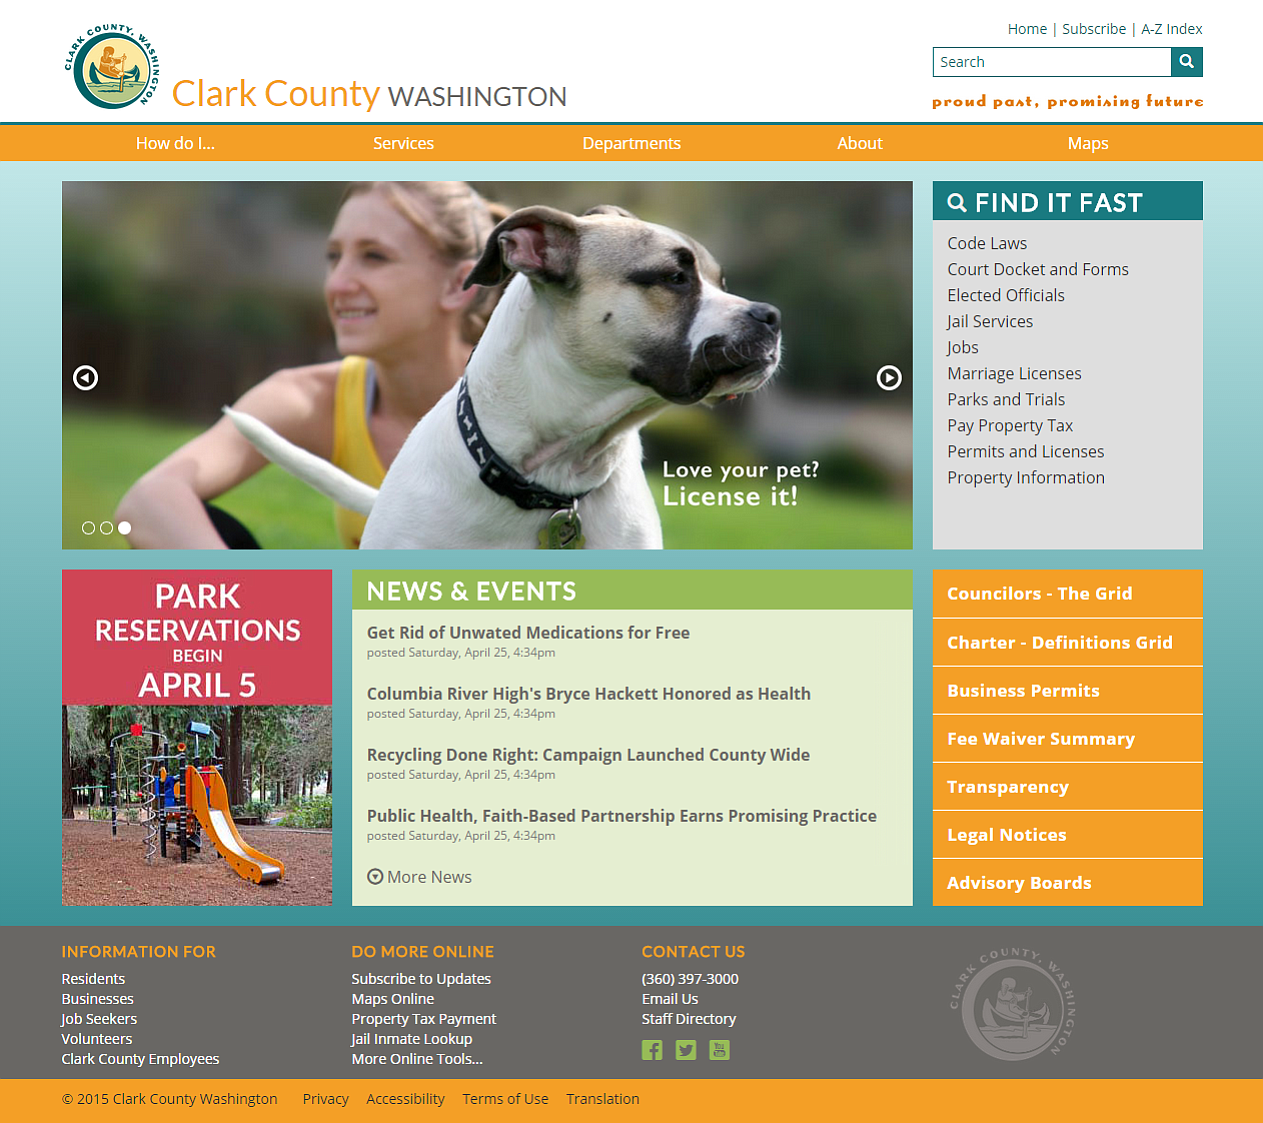 Clark County unveiled the in-progress version of its new website, featuring a sleeker interface and improved navigation.